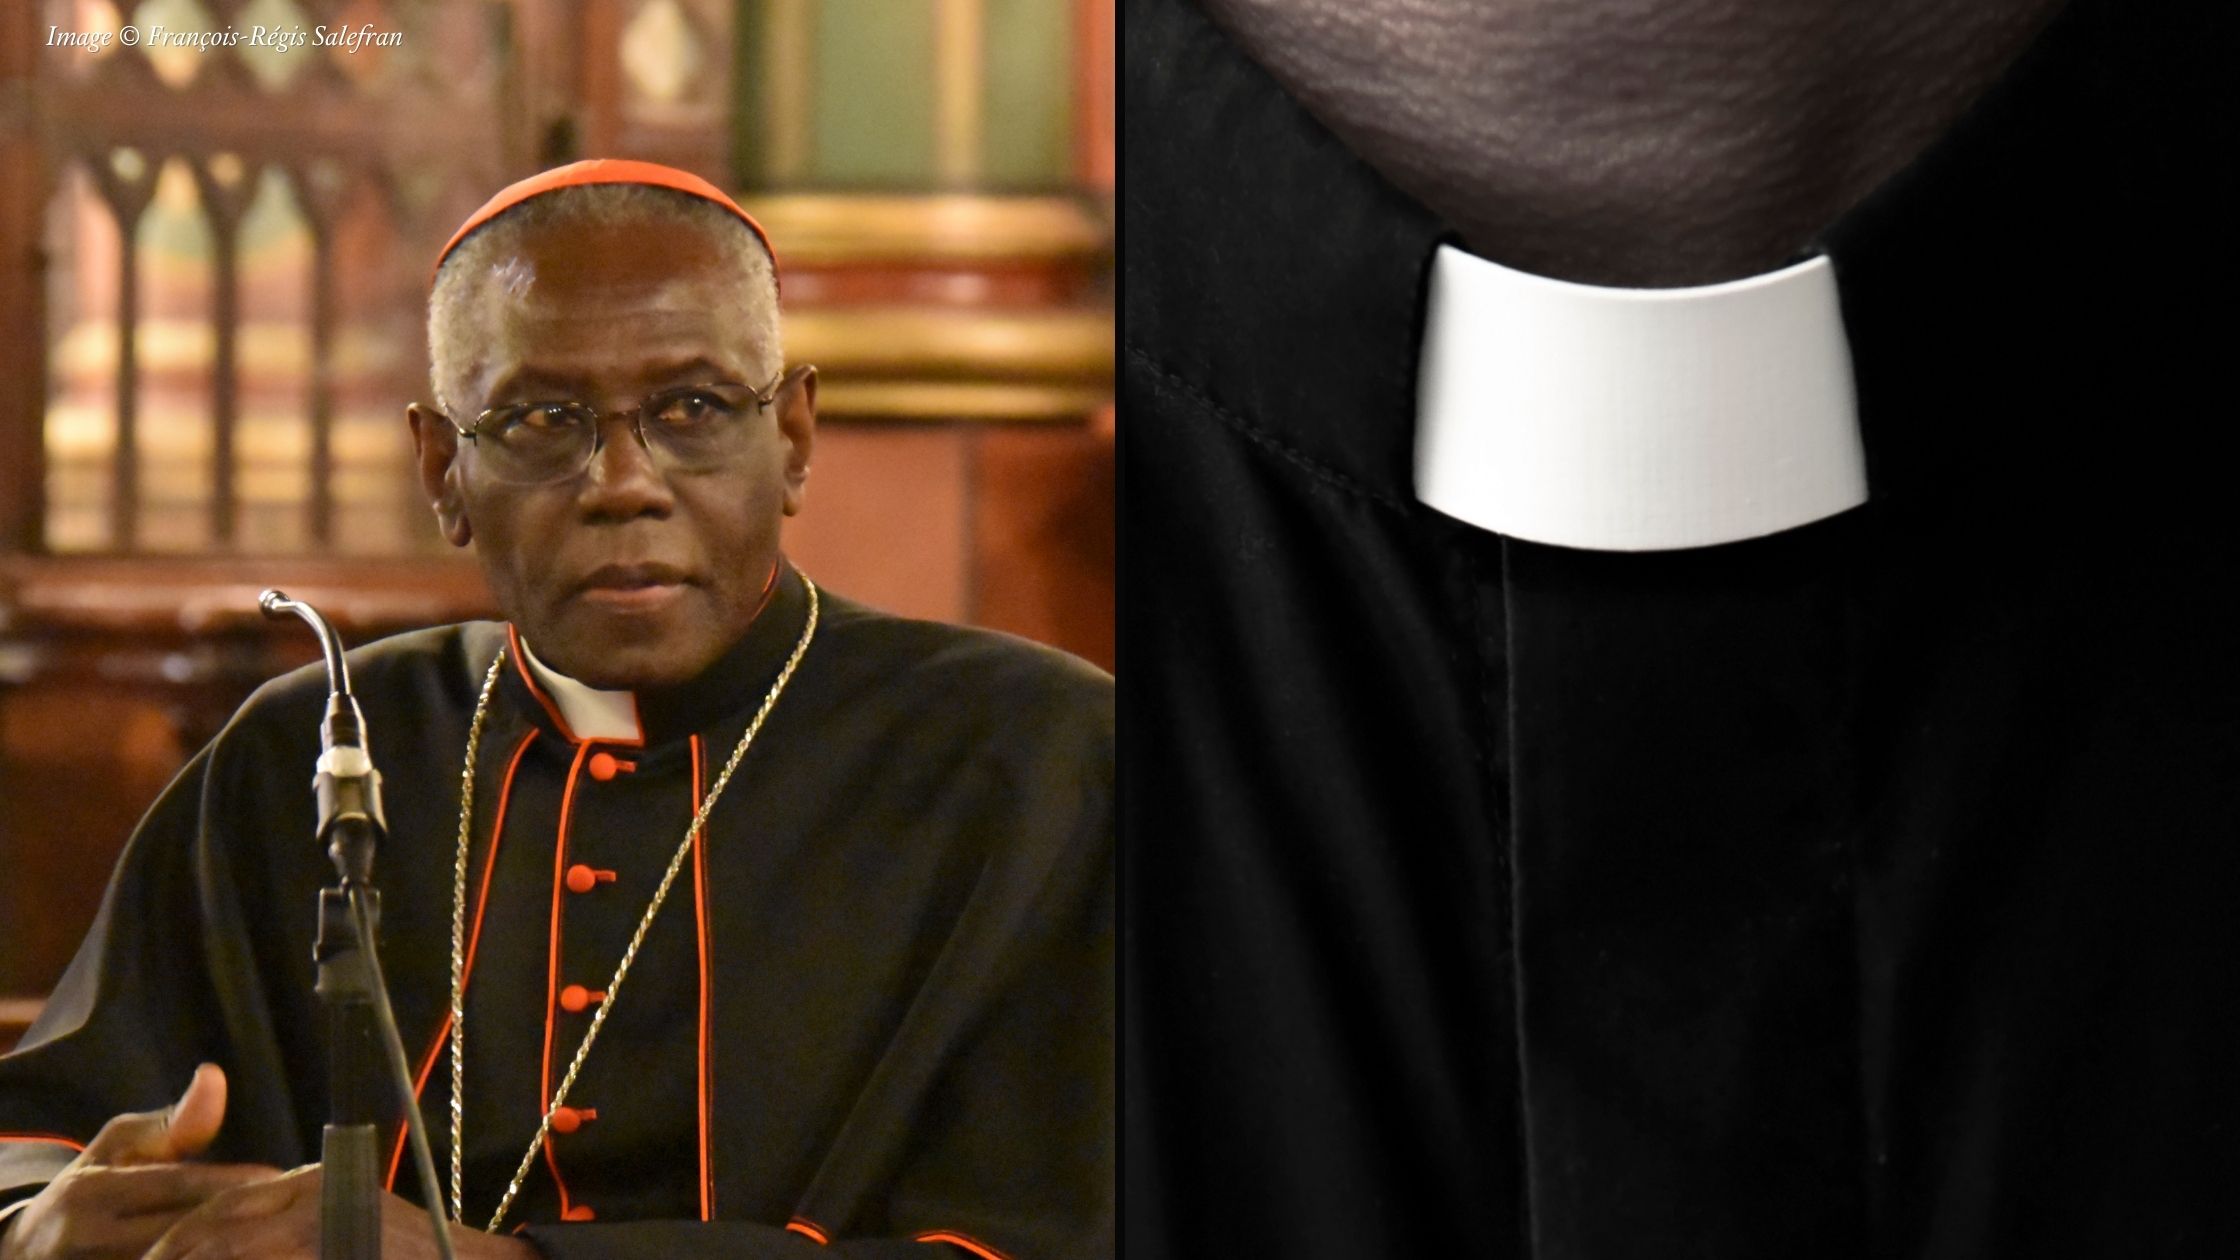 An image of Cardinal Sarah and a separate image of a priest's clerical shirt